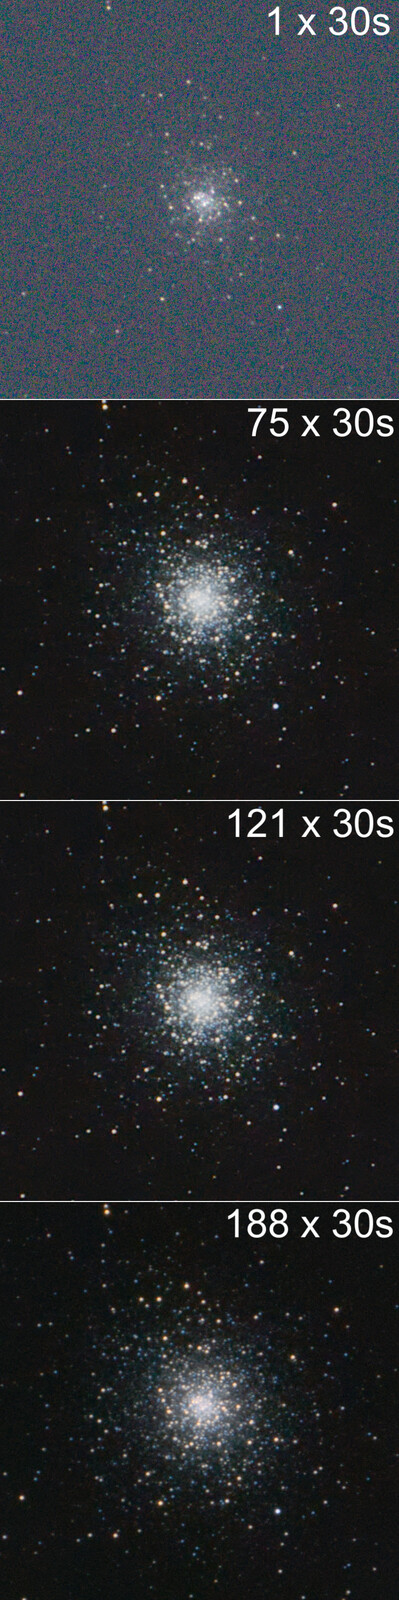 Messier 92 with different numbers of subexposures